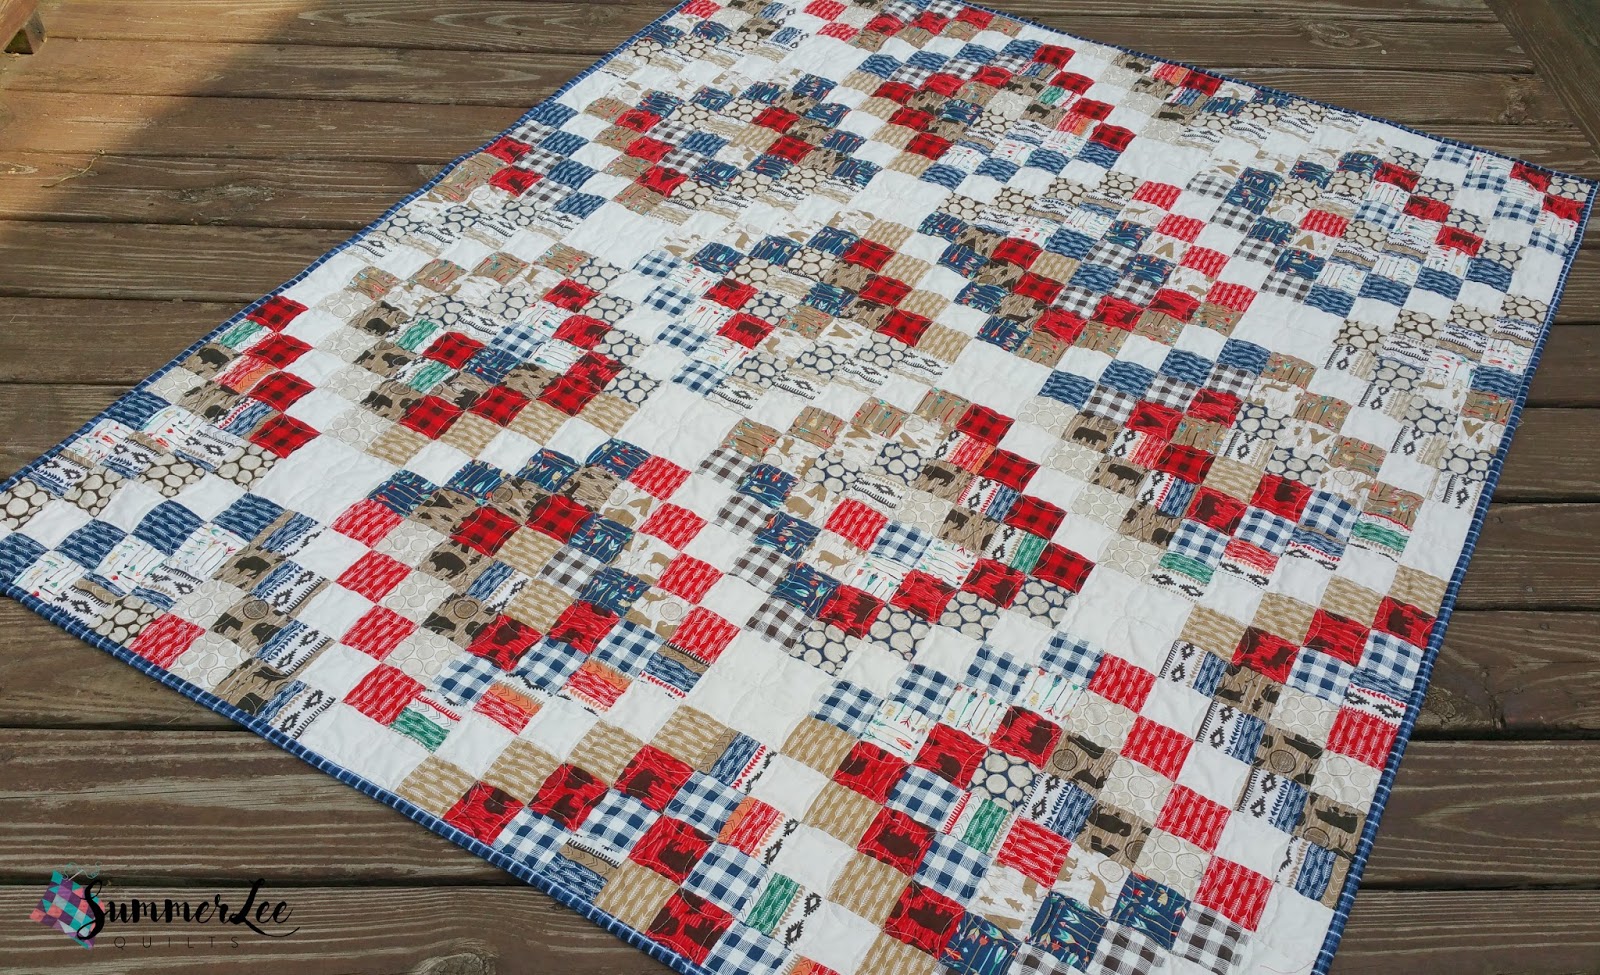 Summer Lee Quilts: TGIFF - Crossing Paths Quilt